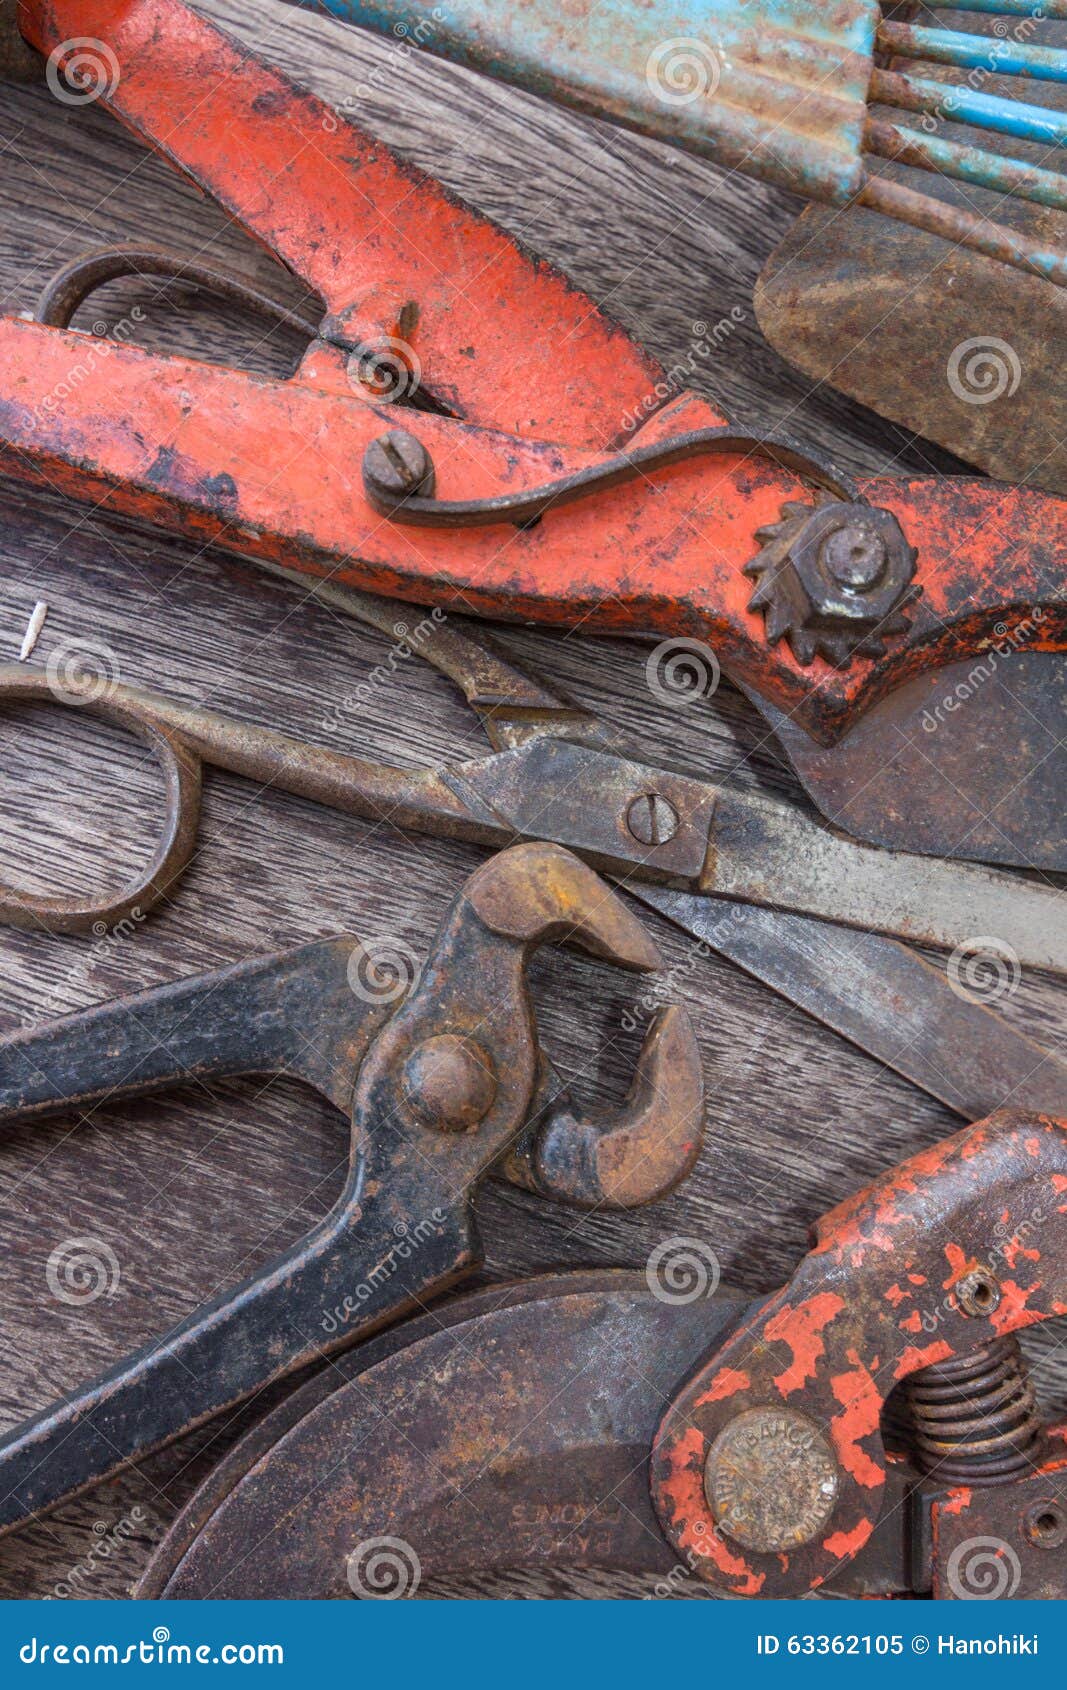 Old Gardening Tools Closeup - Vintage Tool Collection Stock Image ...